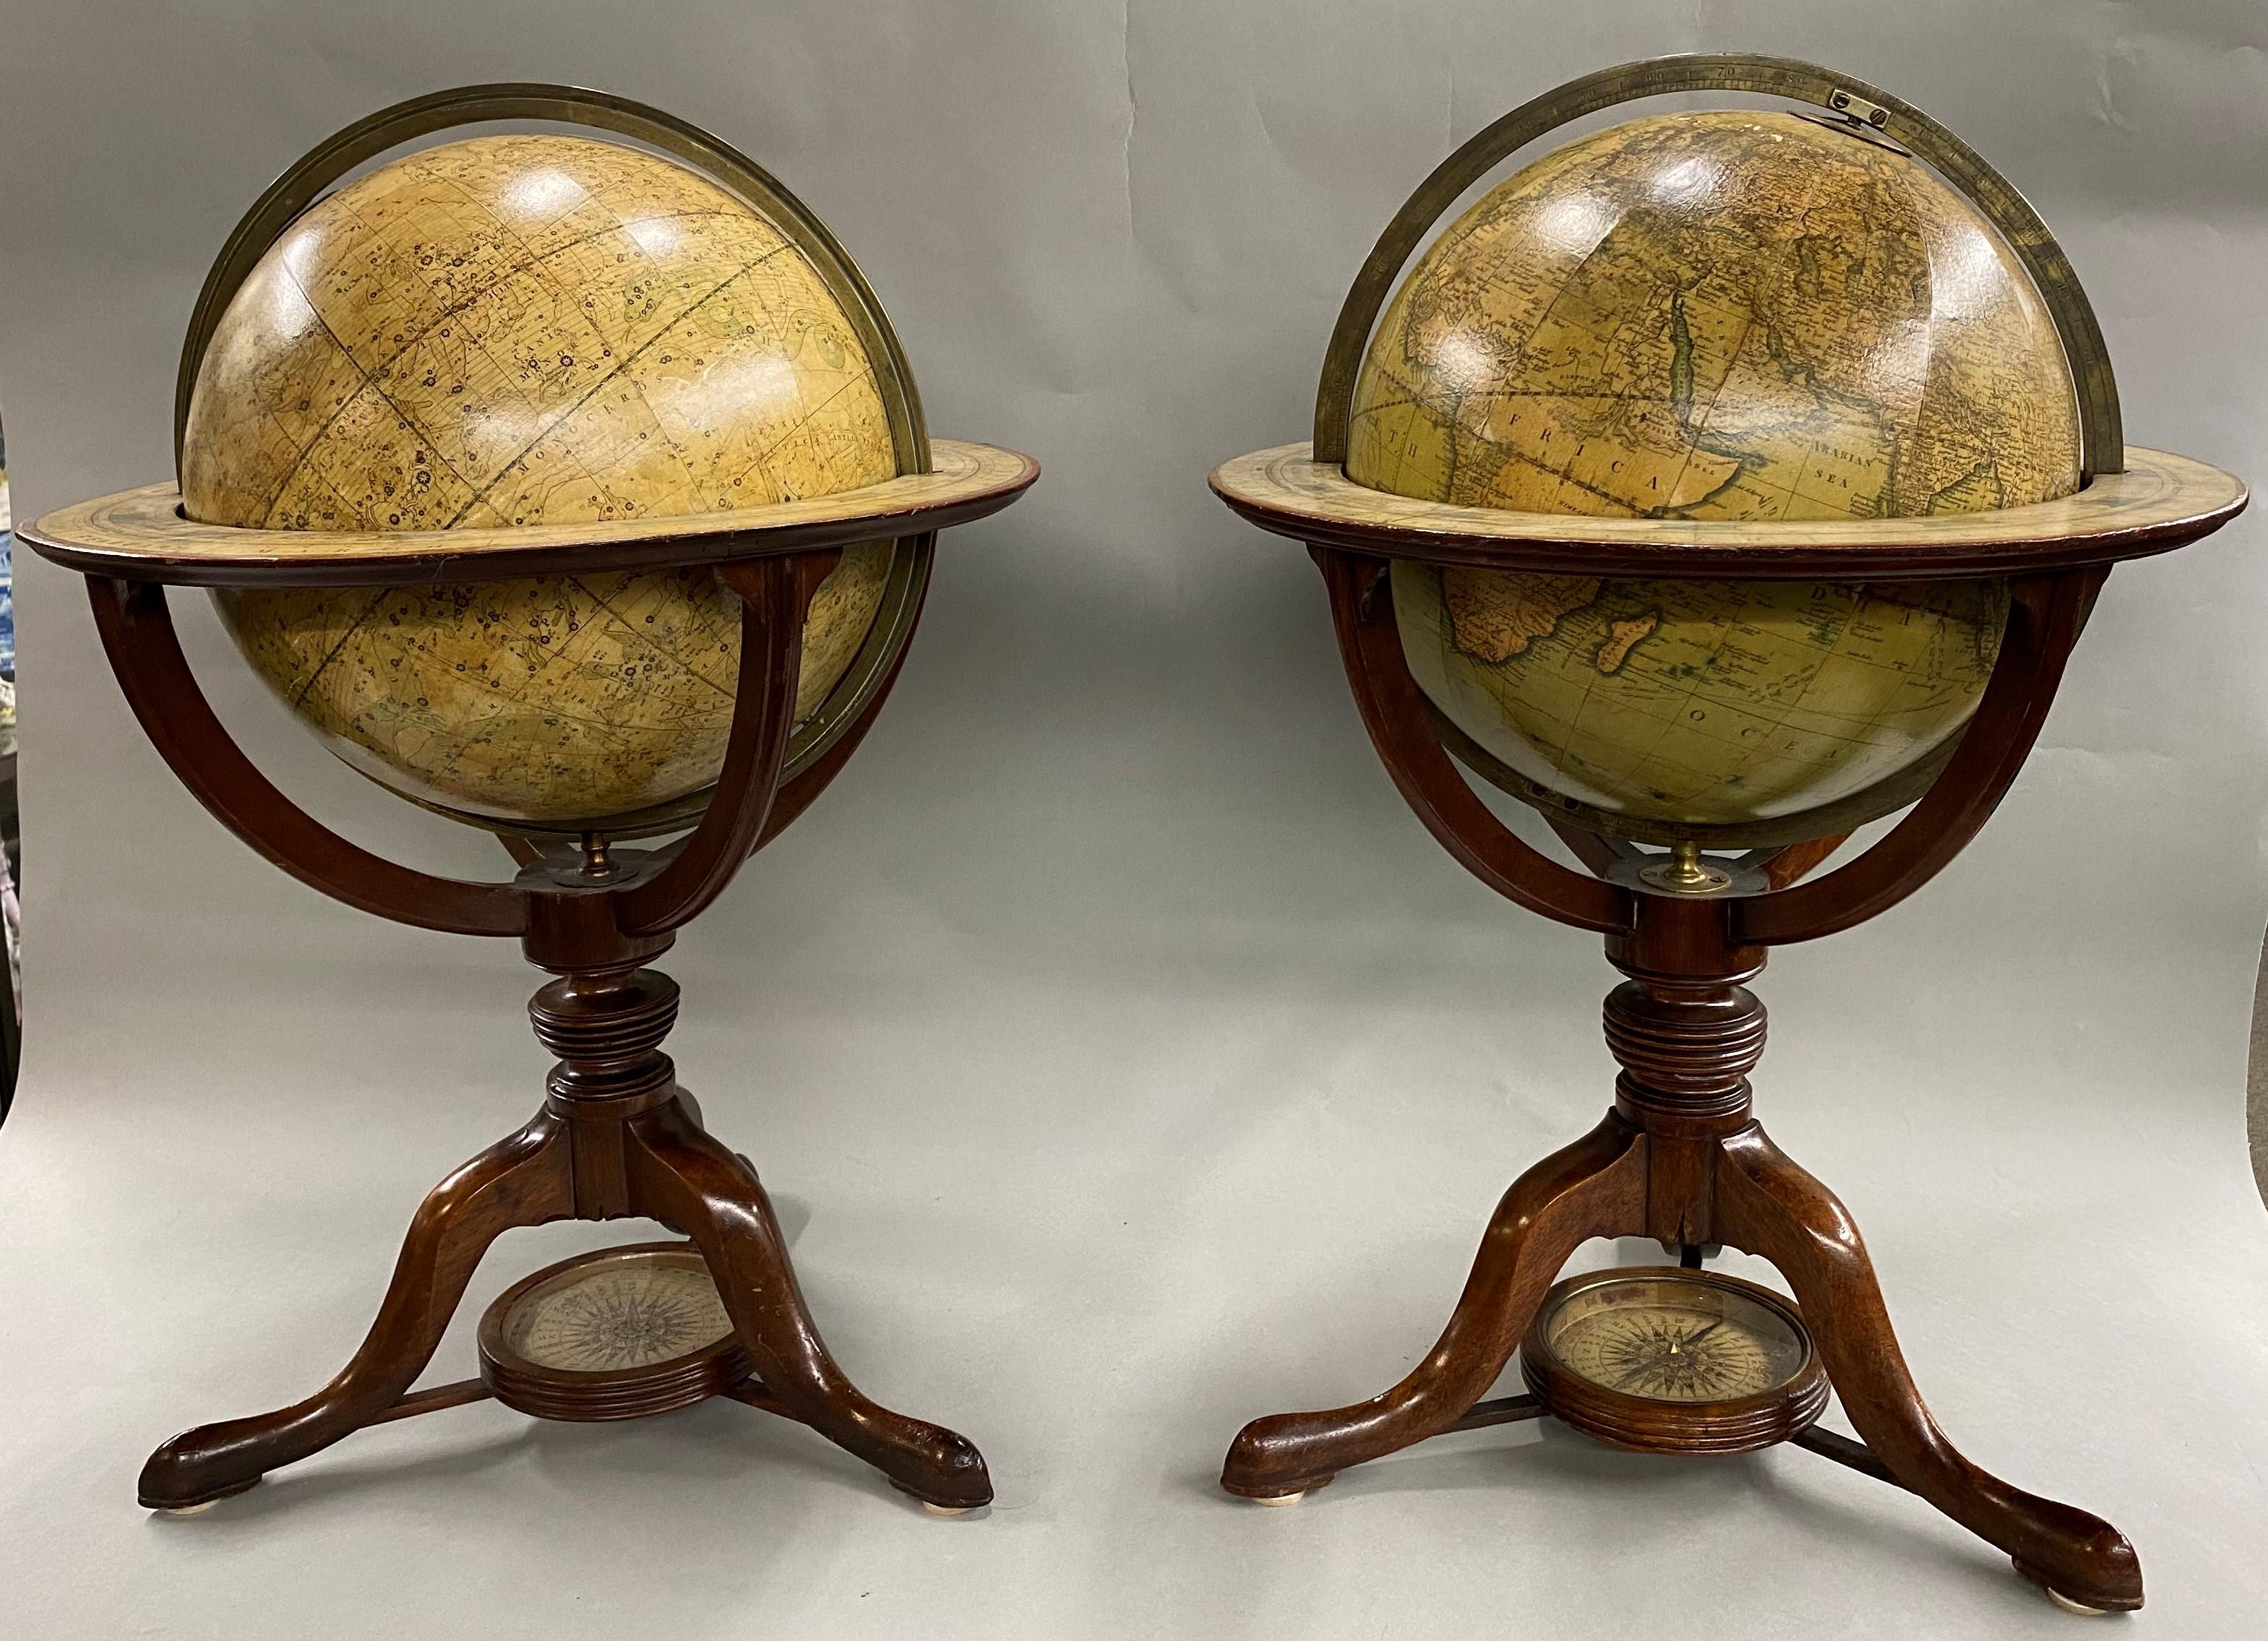 Pair of Early 19th C Cary Celestial & Terrestrial Tabletop Globes For Sale 7